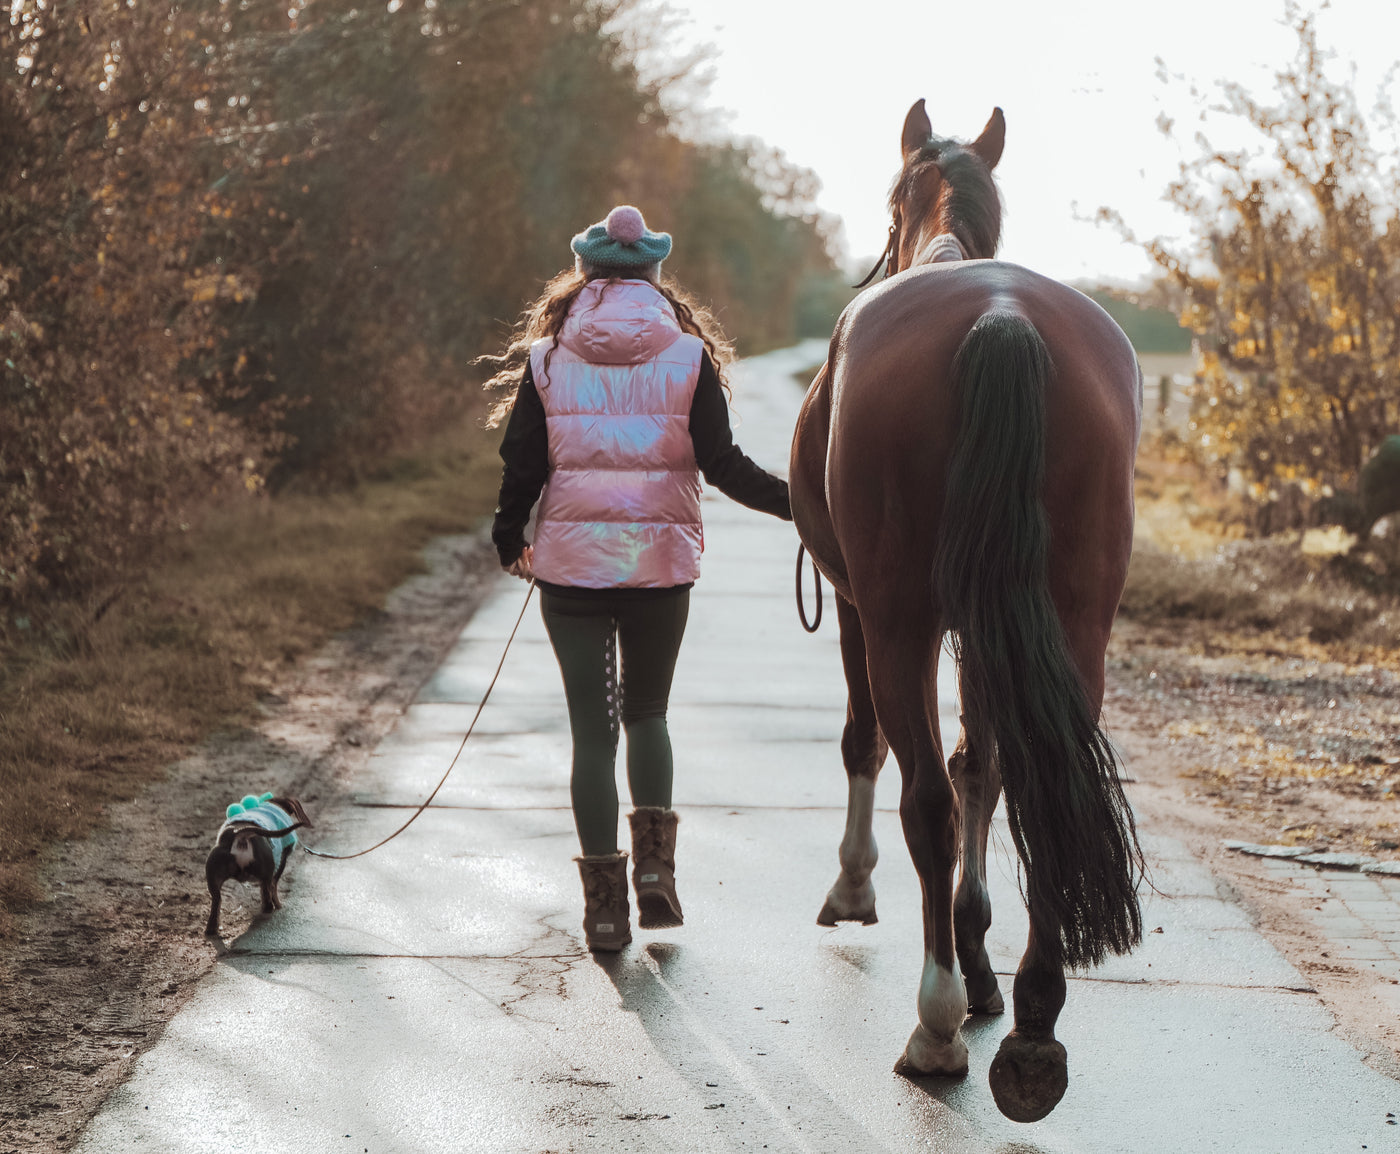 The Confessions of a New Horse Owner